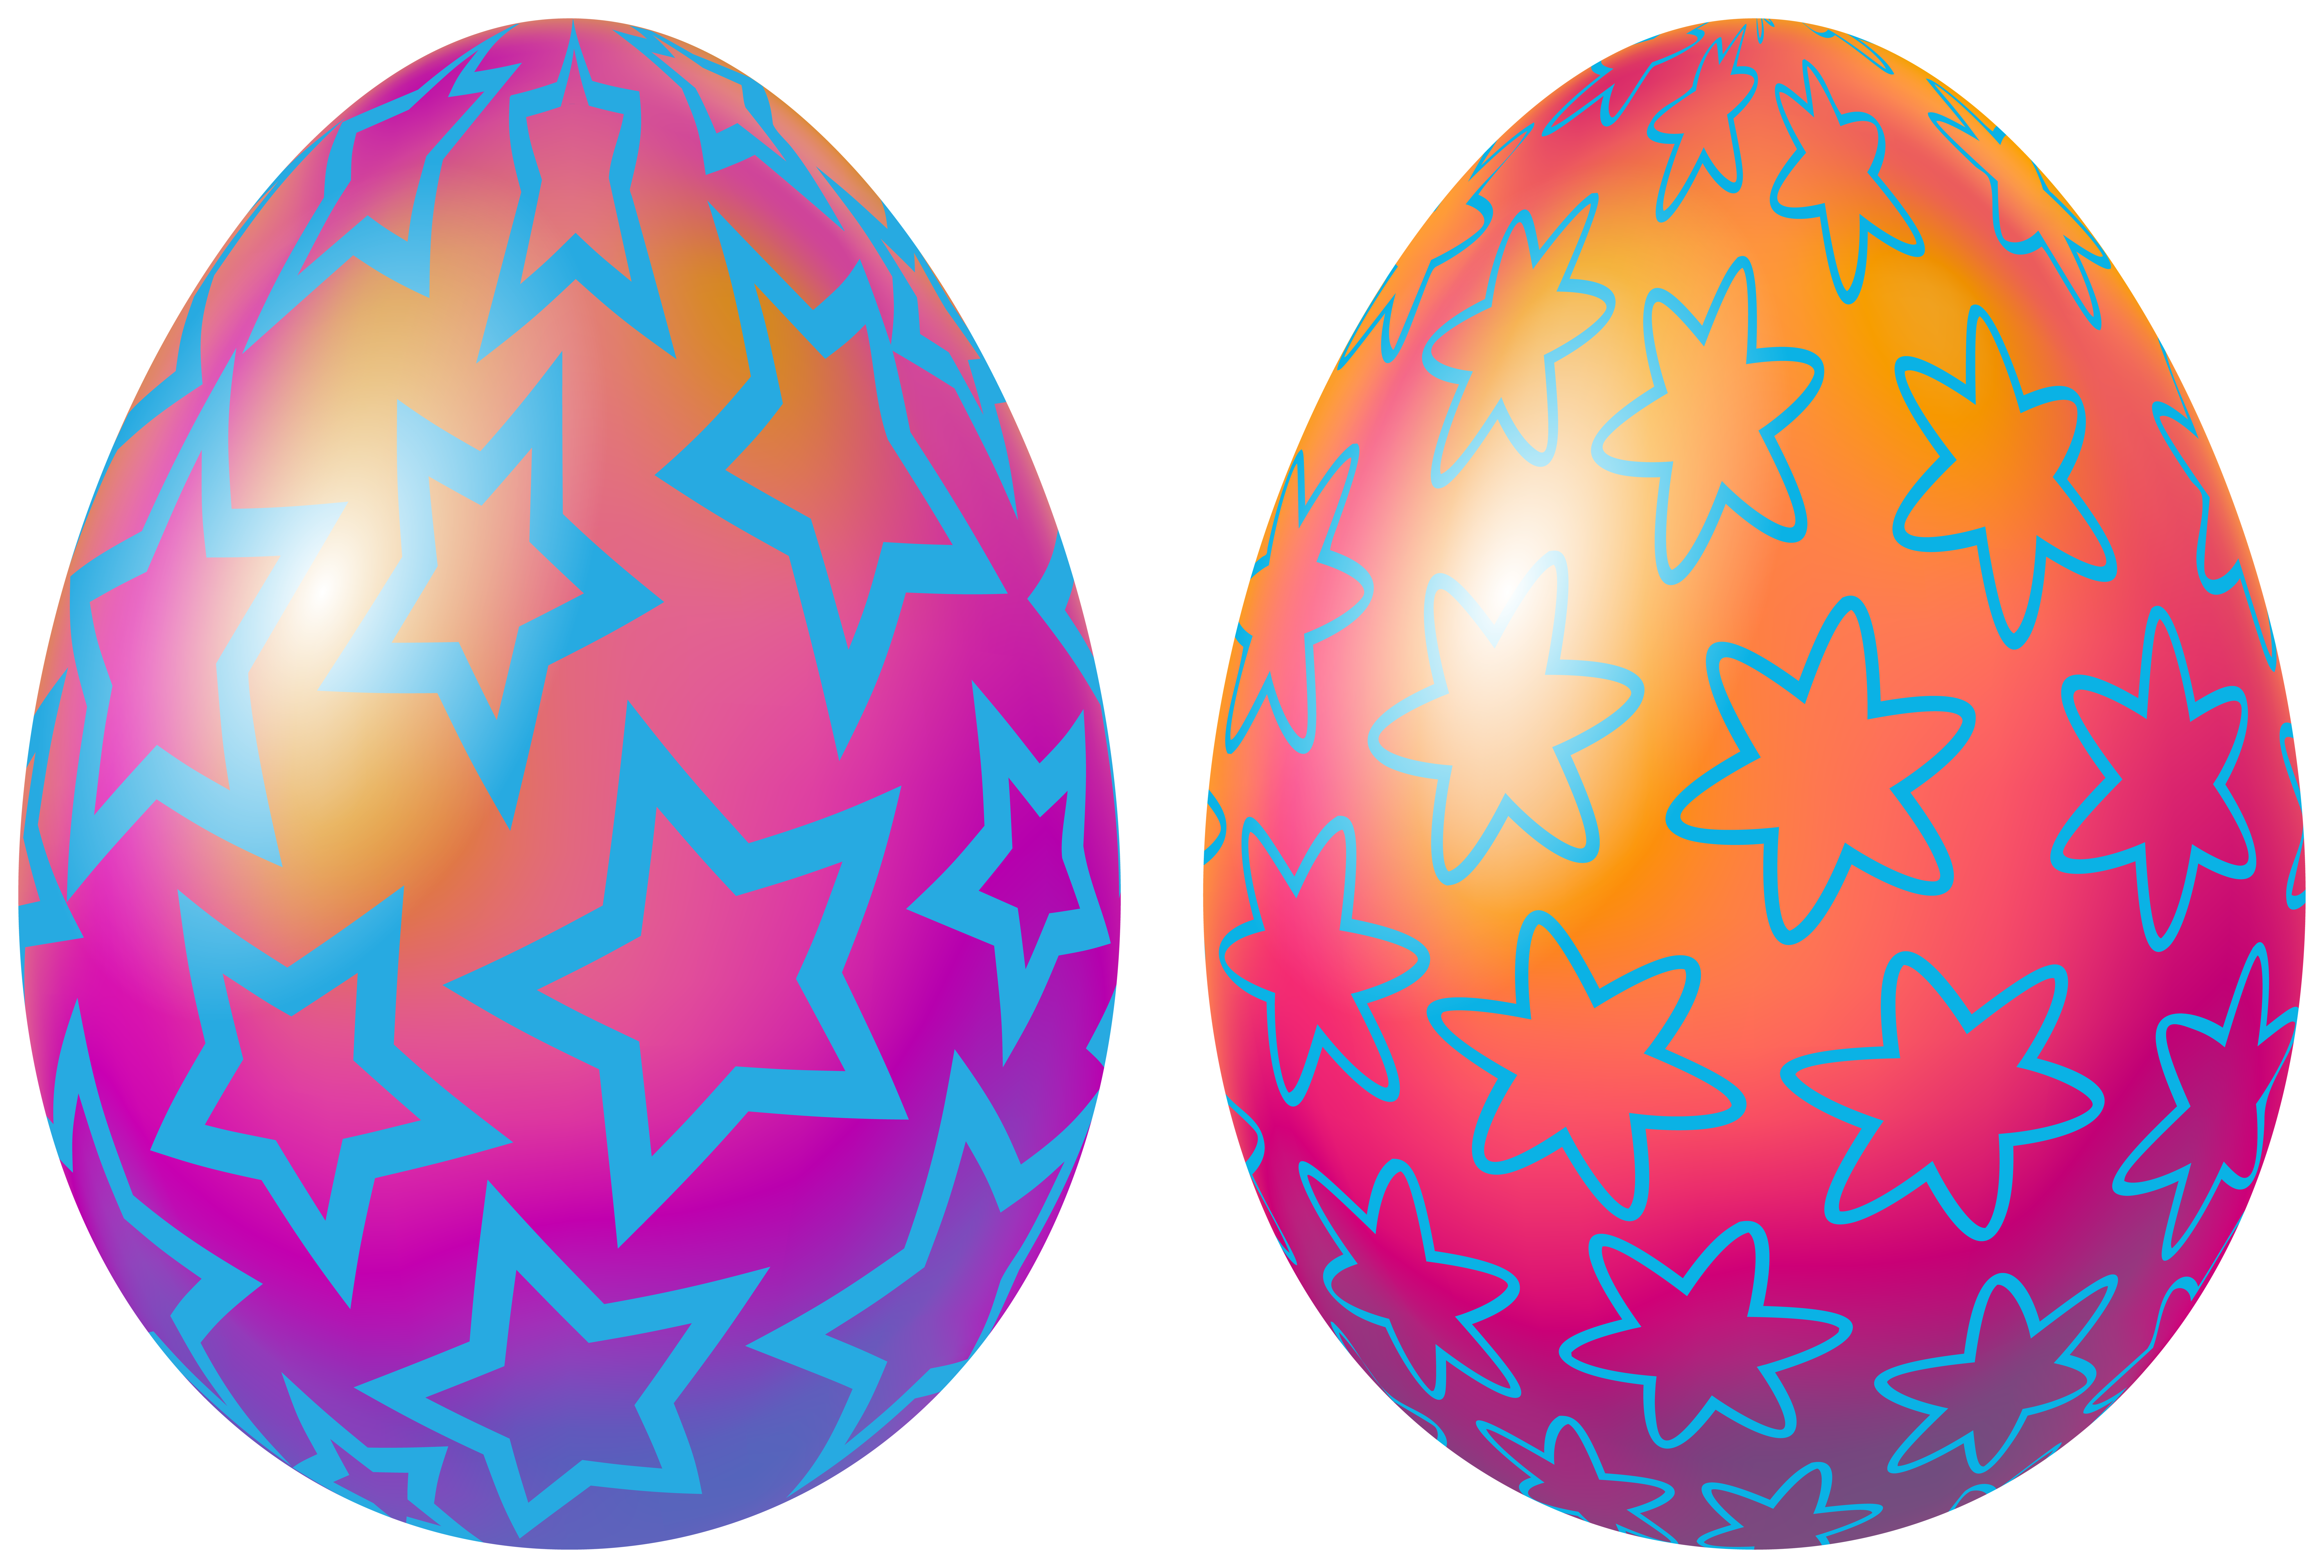 Green Easter Egg with Hearts PNG Clipart Picture​  Gallery Yopriceville -  High-Quality Free Images and Transparent PNG Clipart